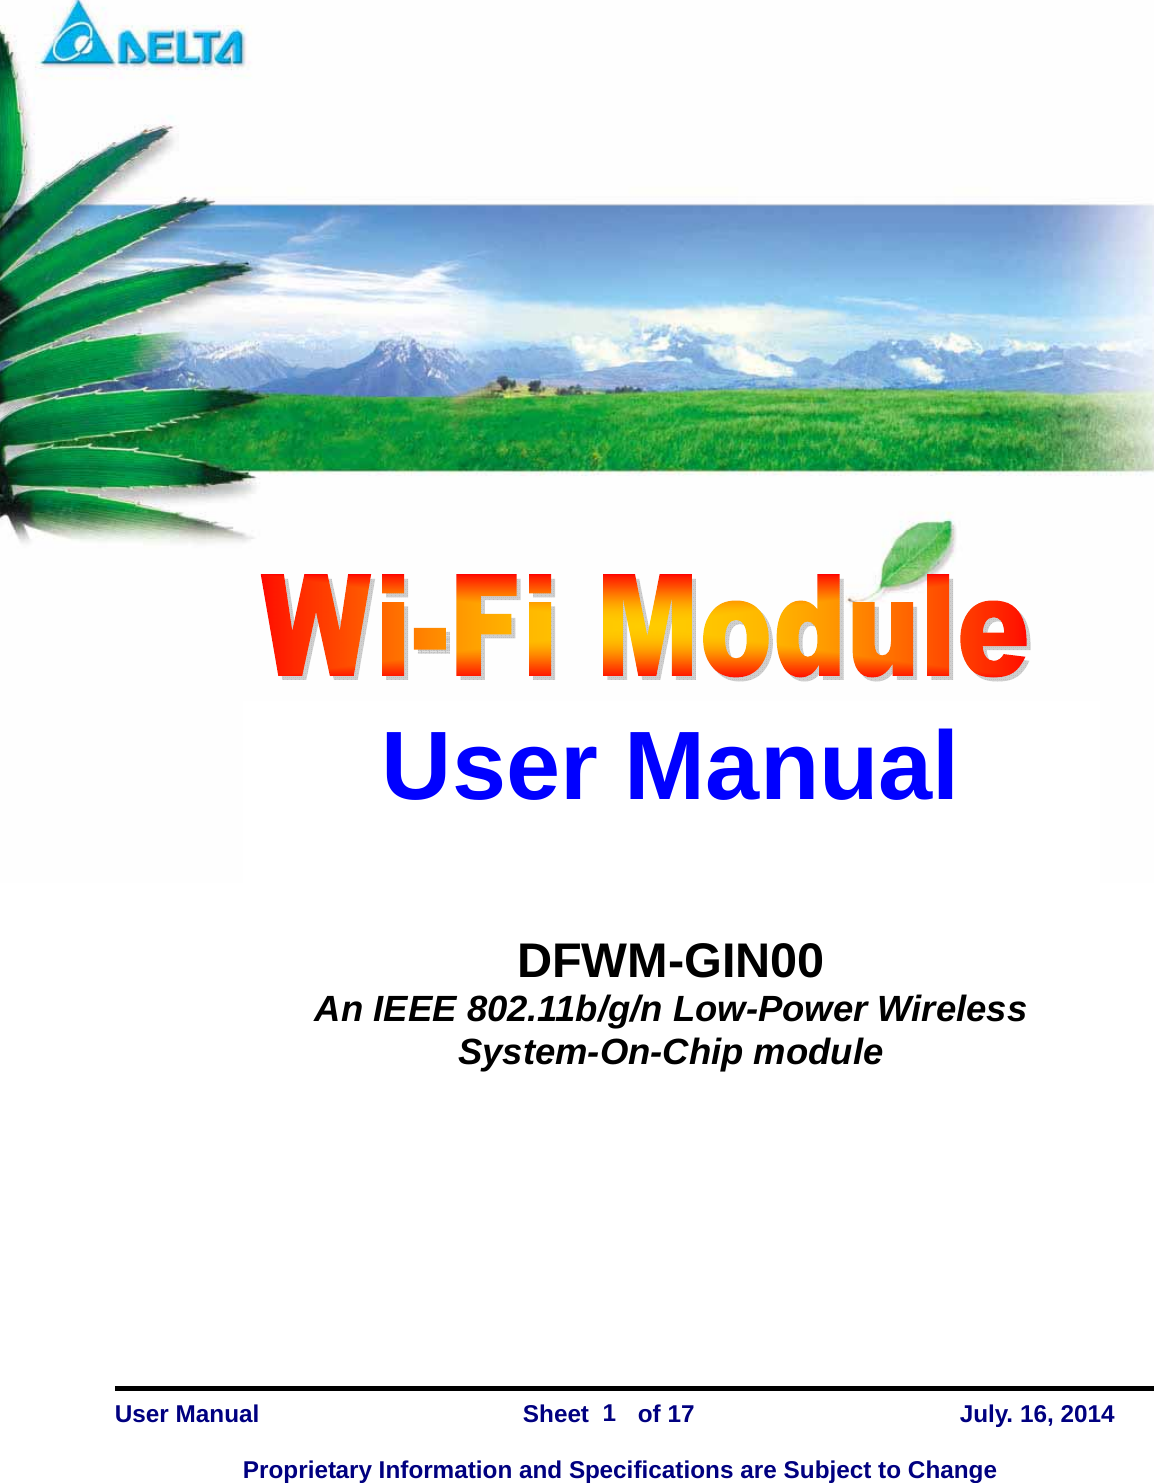   DFWM-GIN00    User Manual                Sheet    of 17      July. 16, 2014  Proprietary Information and Specifications are Subject to Change 1  User Manual   DFWM-GIN00 An IEEE 802.11b/g/n Low-Power Wireless System-On-Chip module 